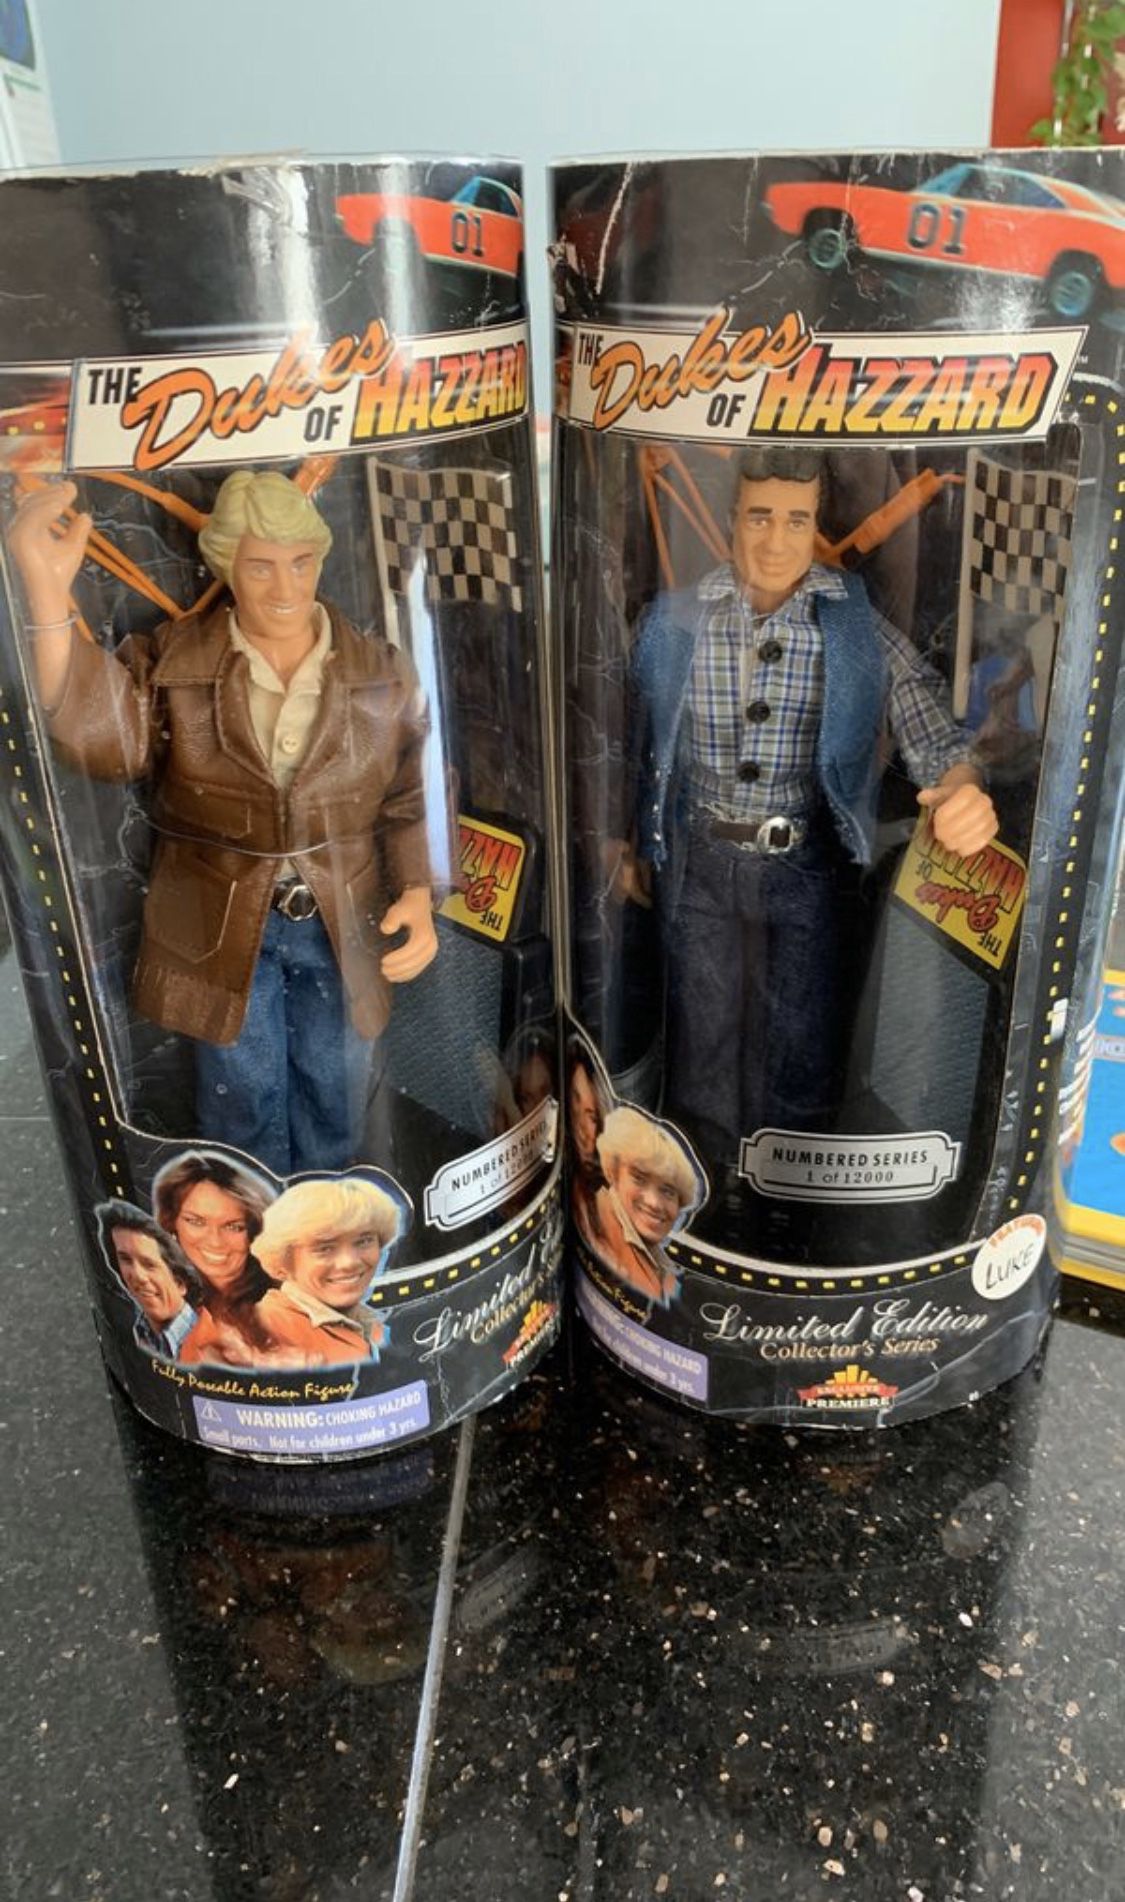 Dukes of hazzard limited edition collectors action figures